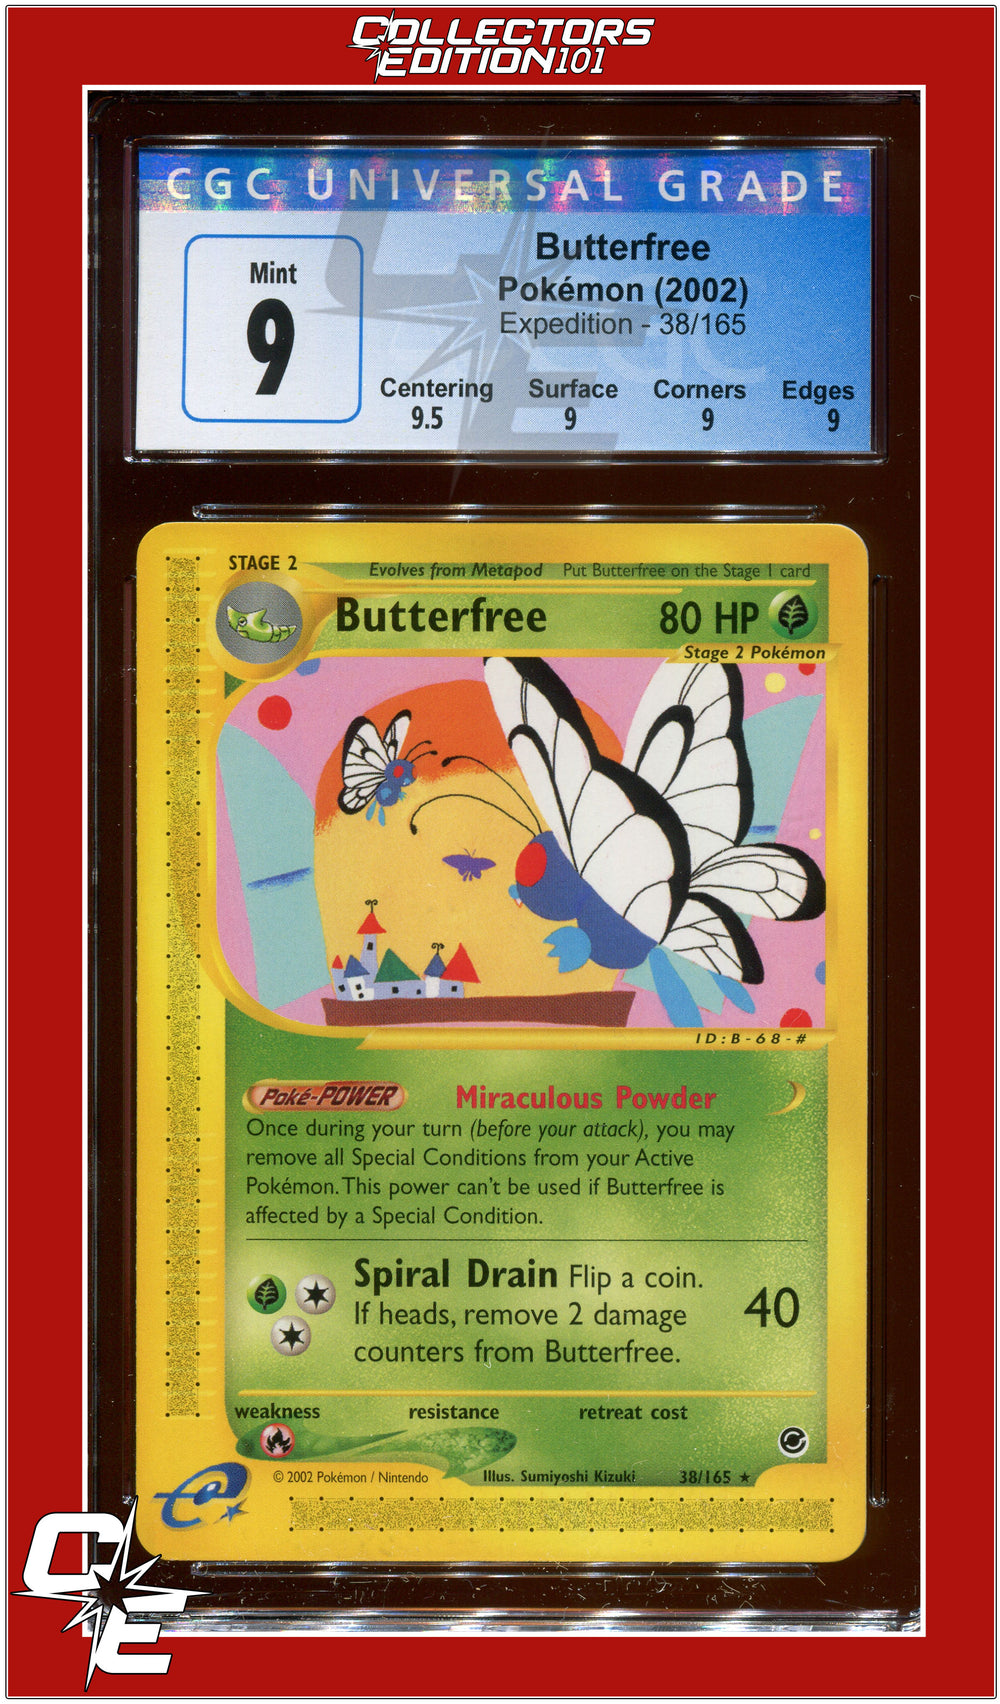 Expedition Butterfree 38/165 CGC 9 - Subgrades